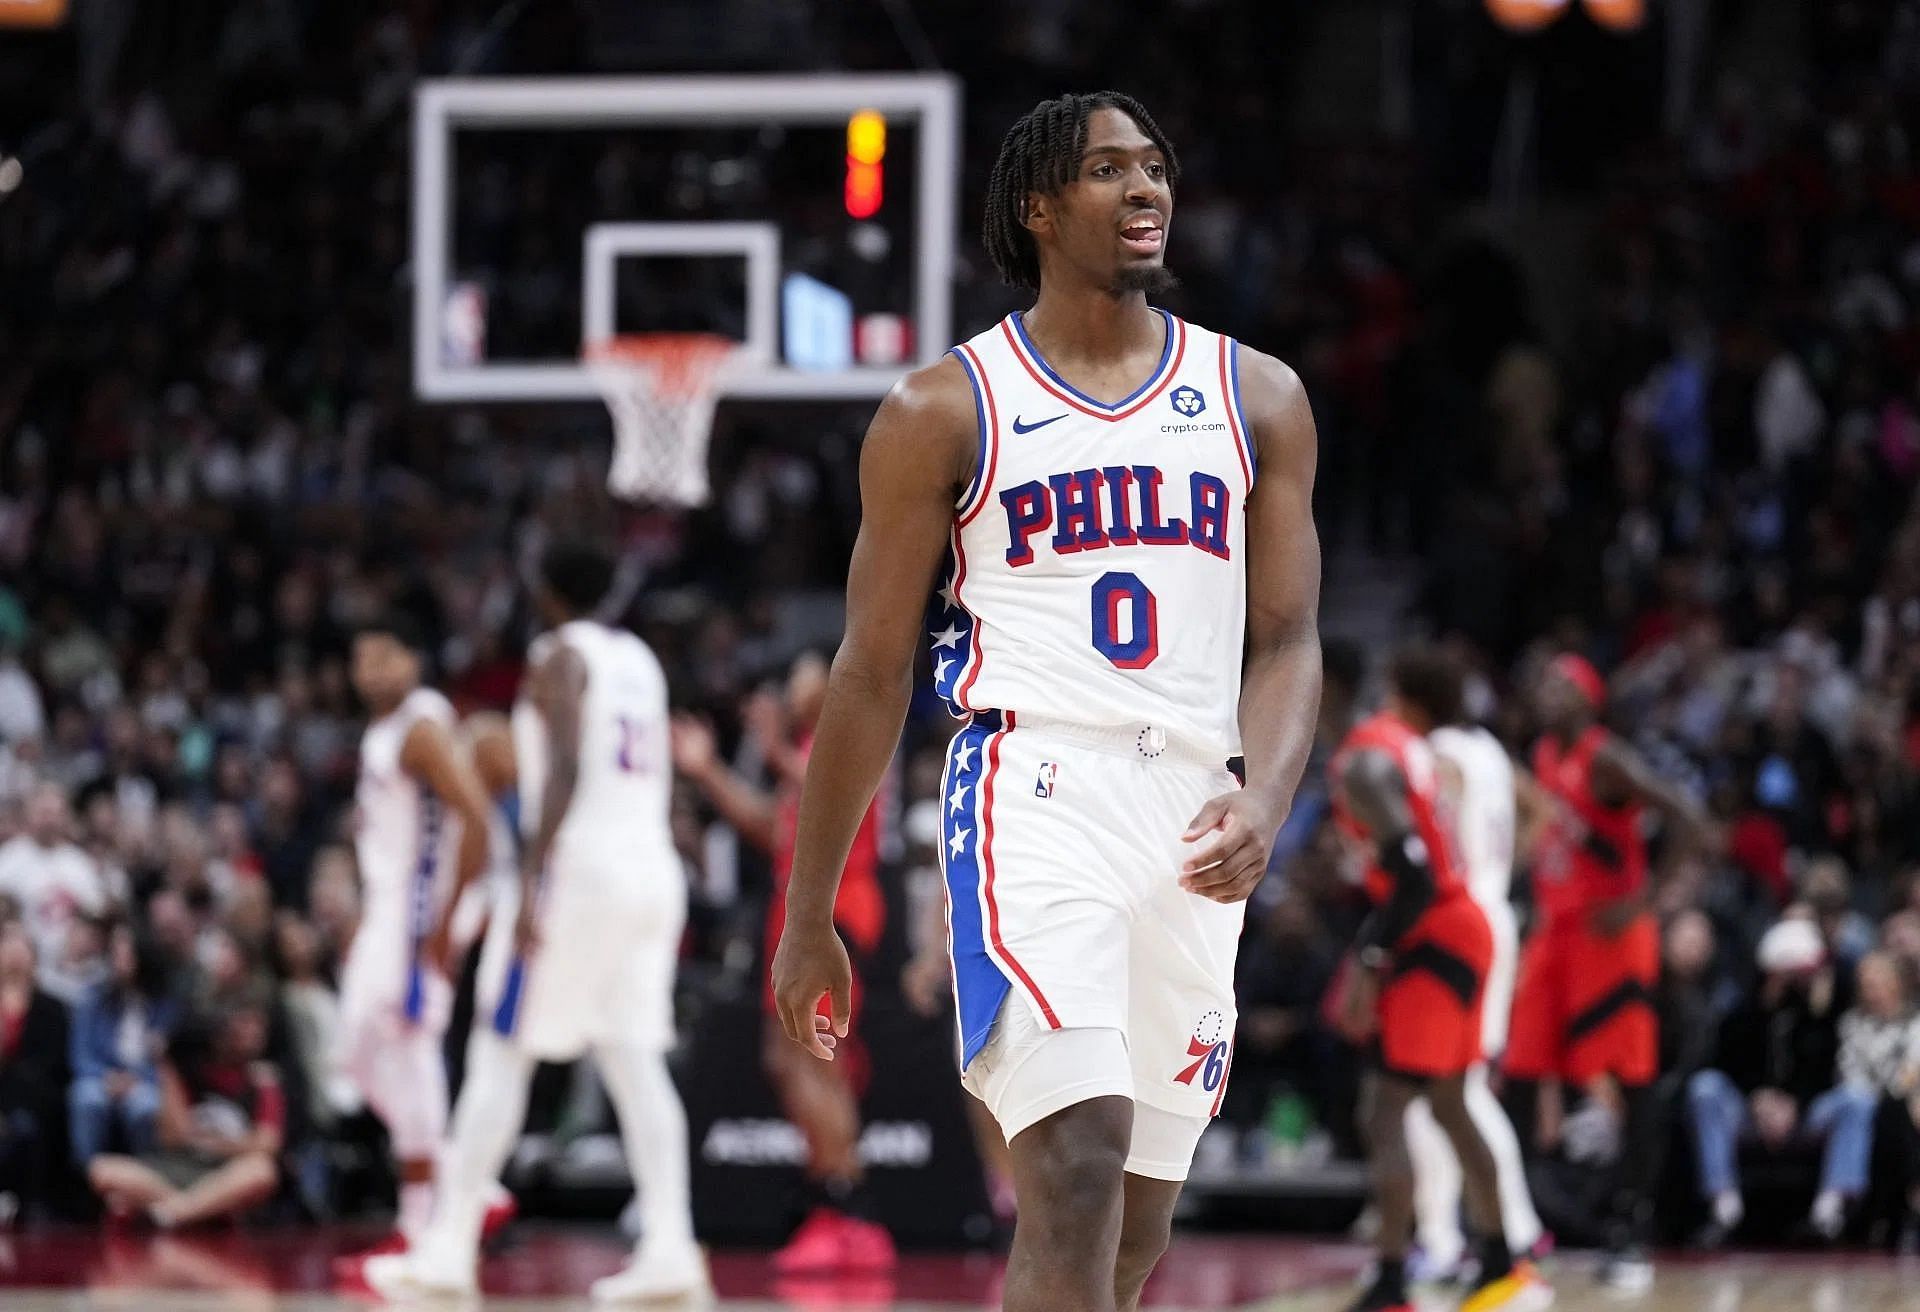 Philadelphia 76ers guard Tyrese Maxey had a lively back-and-forth with a Pelicans fan in New Orleans on Wednesday.